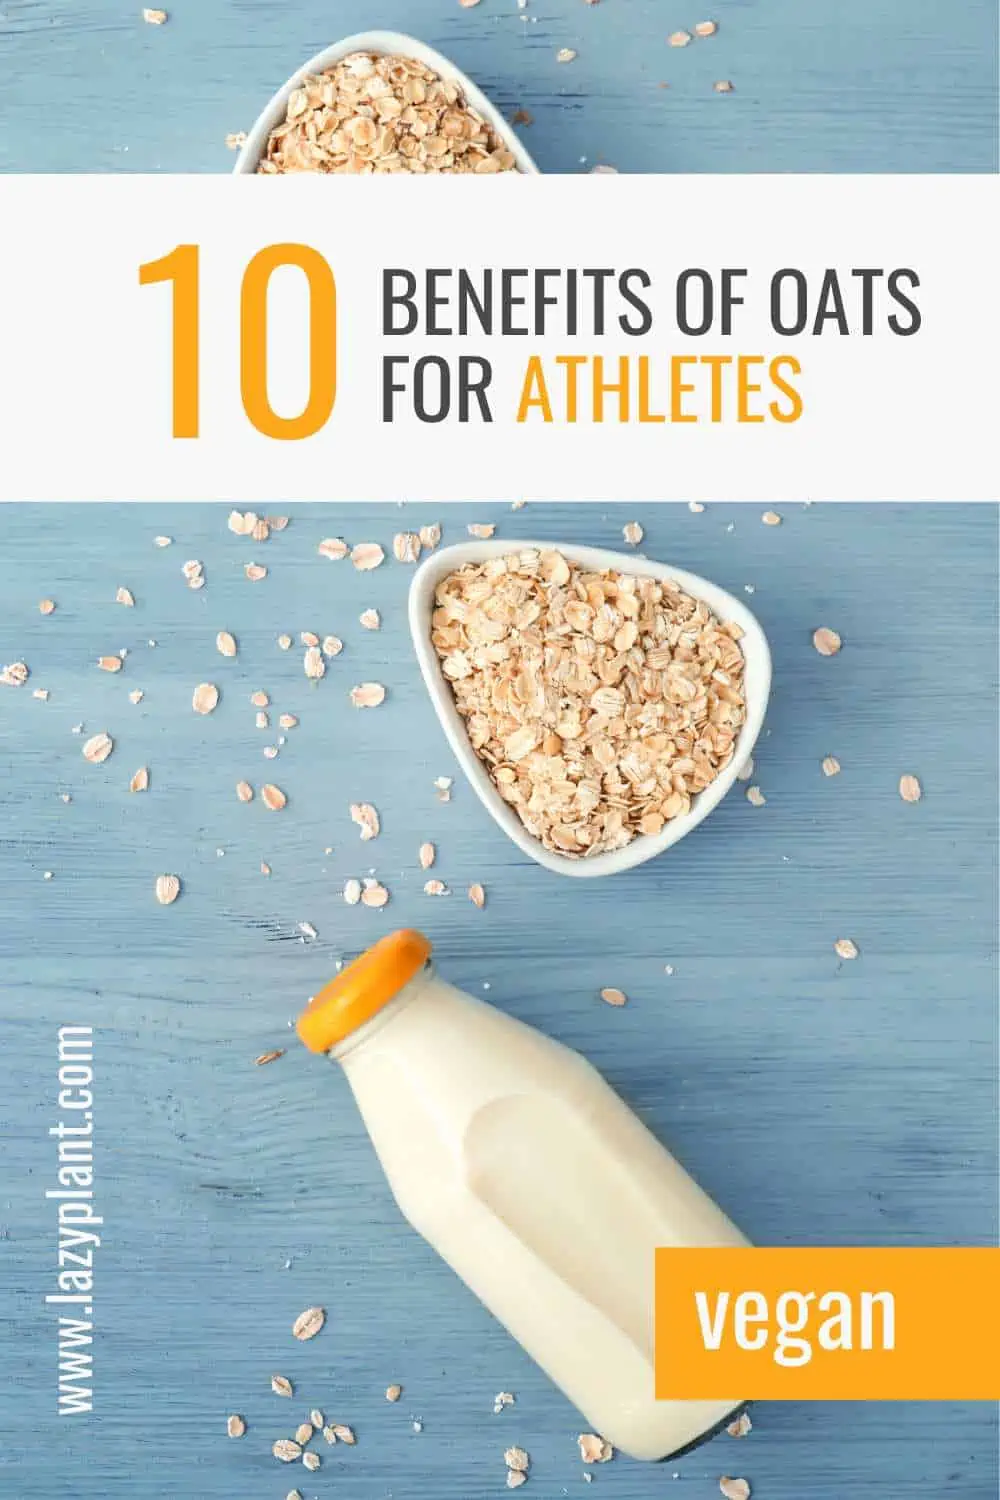 Benefits of eating oats for athletic performance!